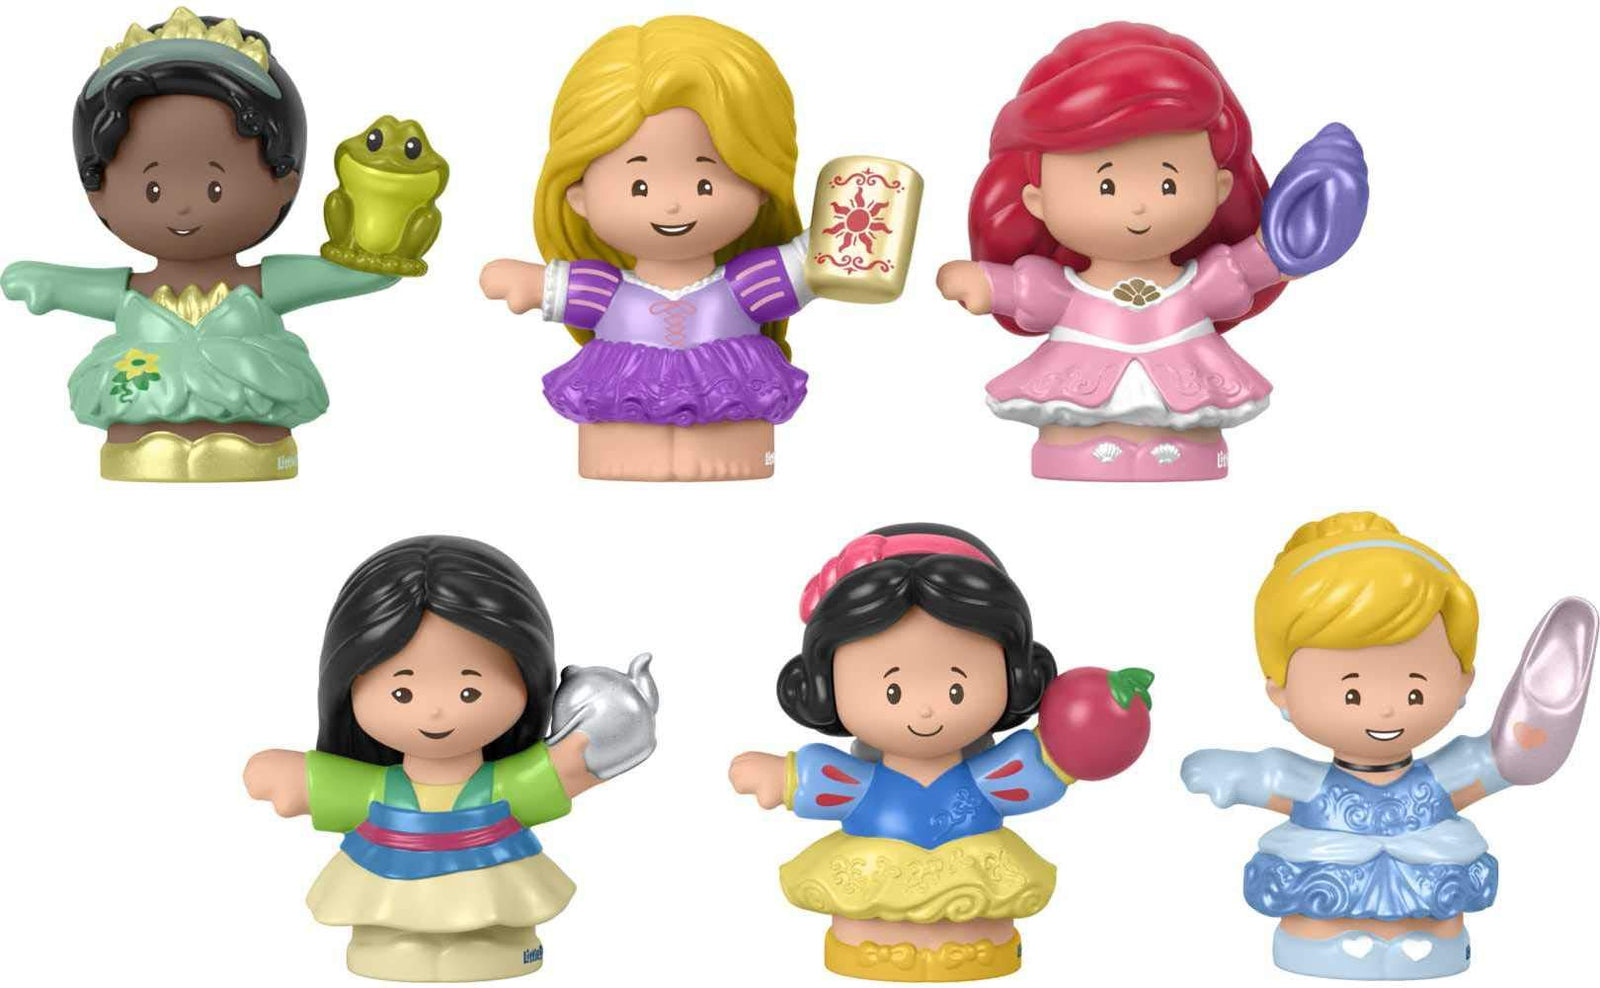 Fisher-Price Disney Princess Gift Set by Little People, 6 Character Figures for Toddlers and Preschool Kids Ages 18 Months to 5 Years